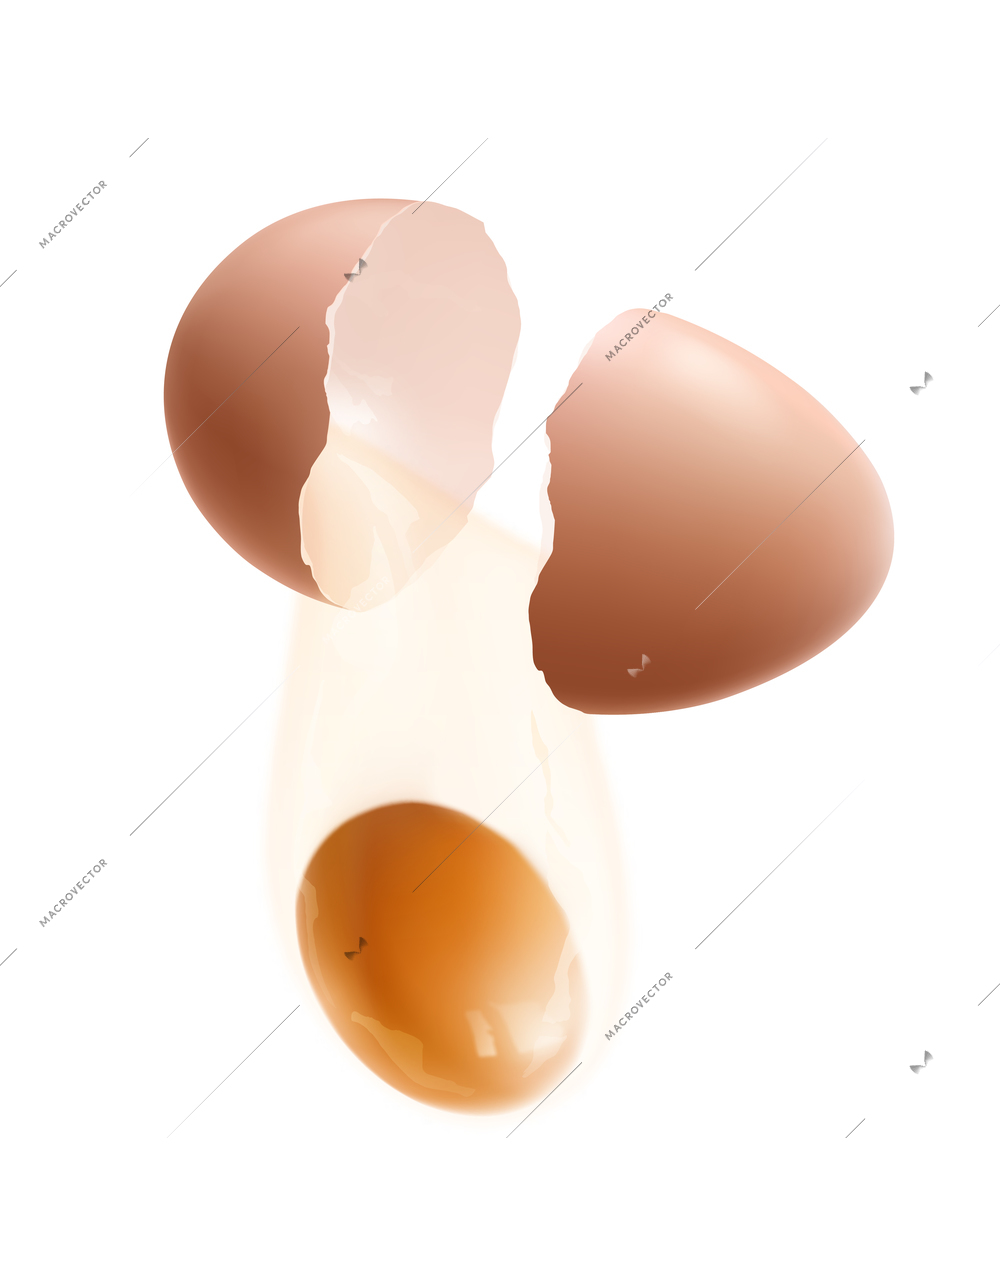 Hen eggs composition with isolated realistic food image on blank background vector illustration